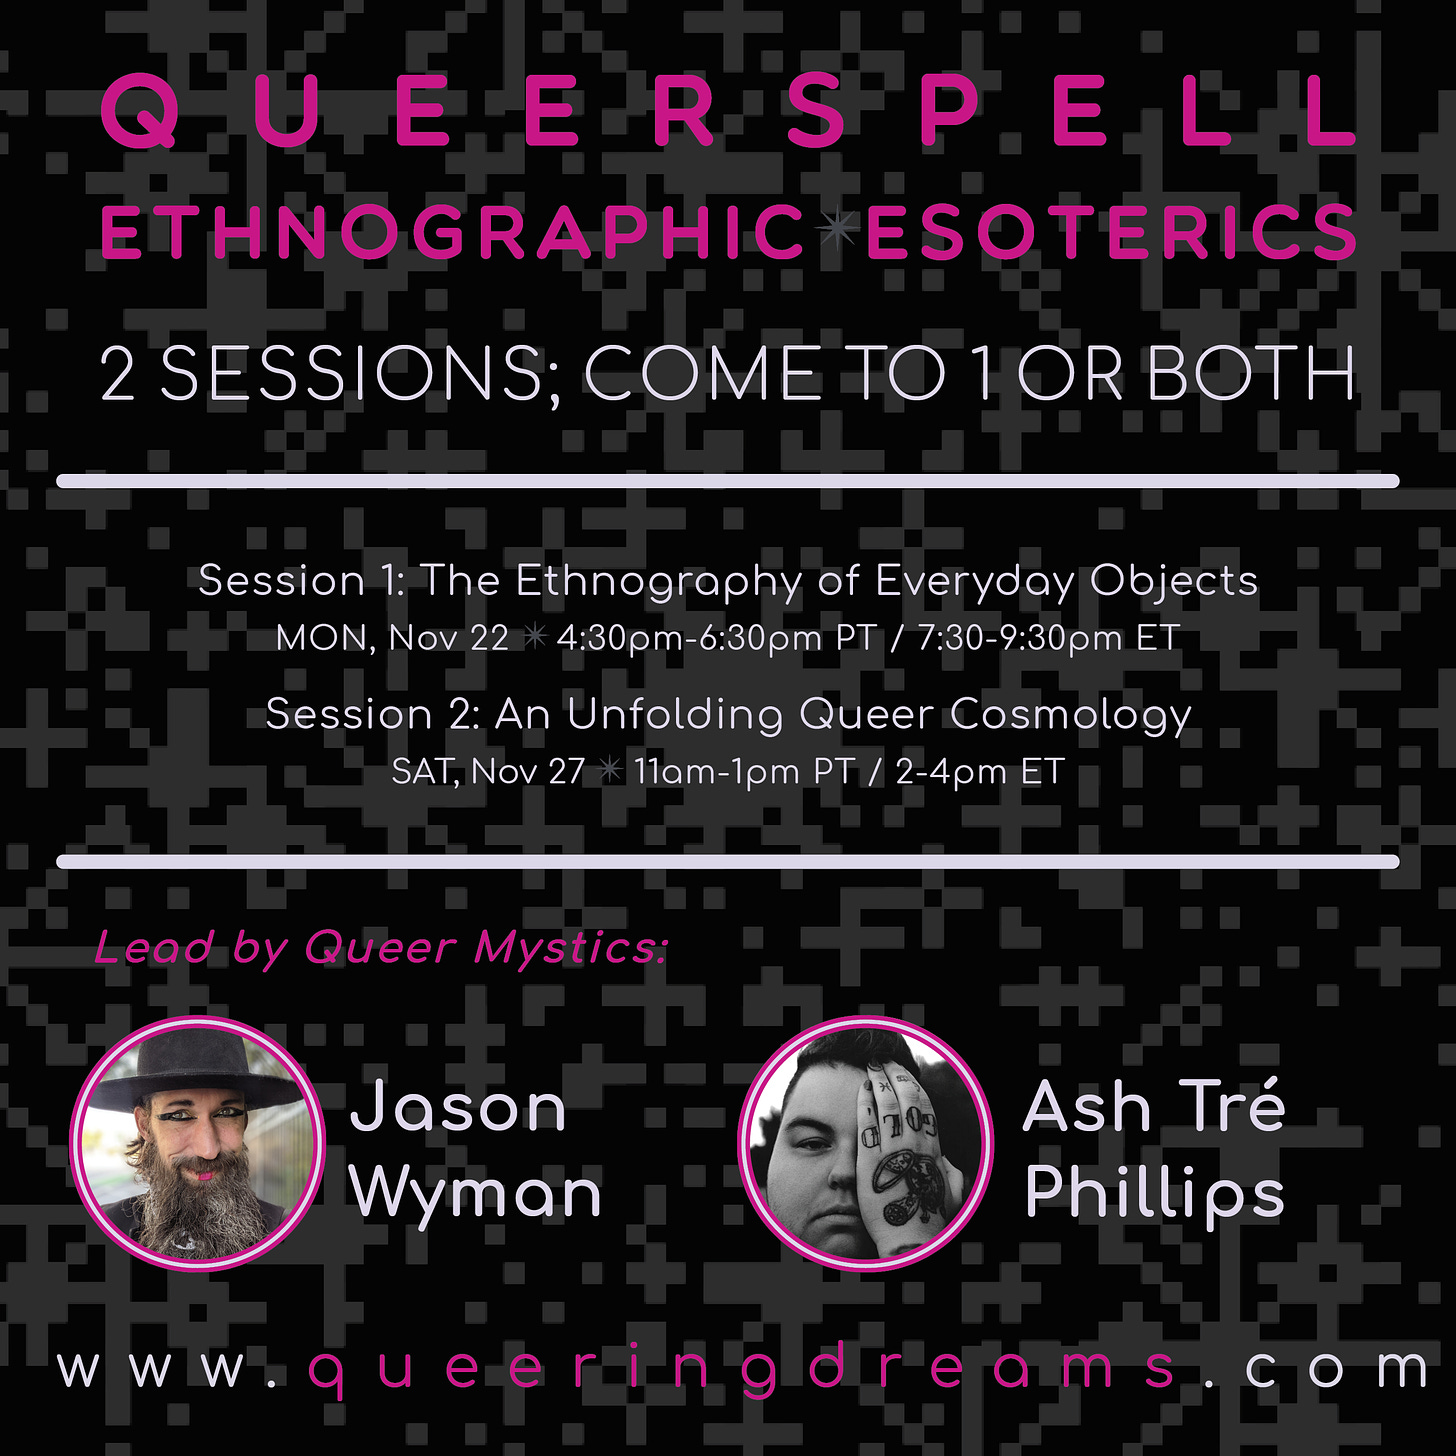 A digital flyer of QUEERSPELL: Ethnographic Esoterics with Ash Tre Phillips and Jason Wyman